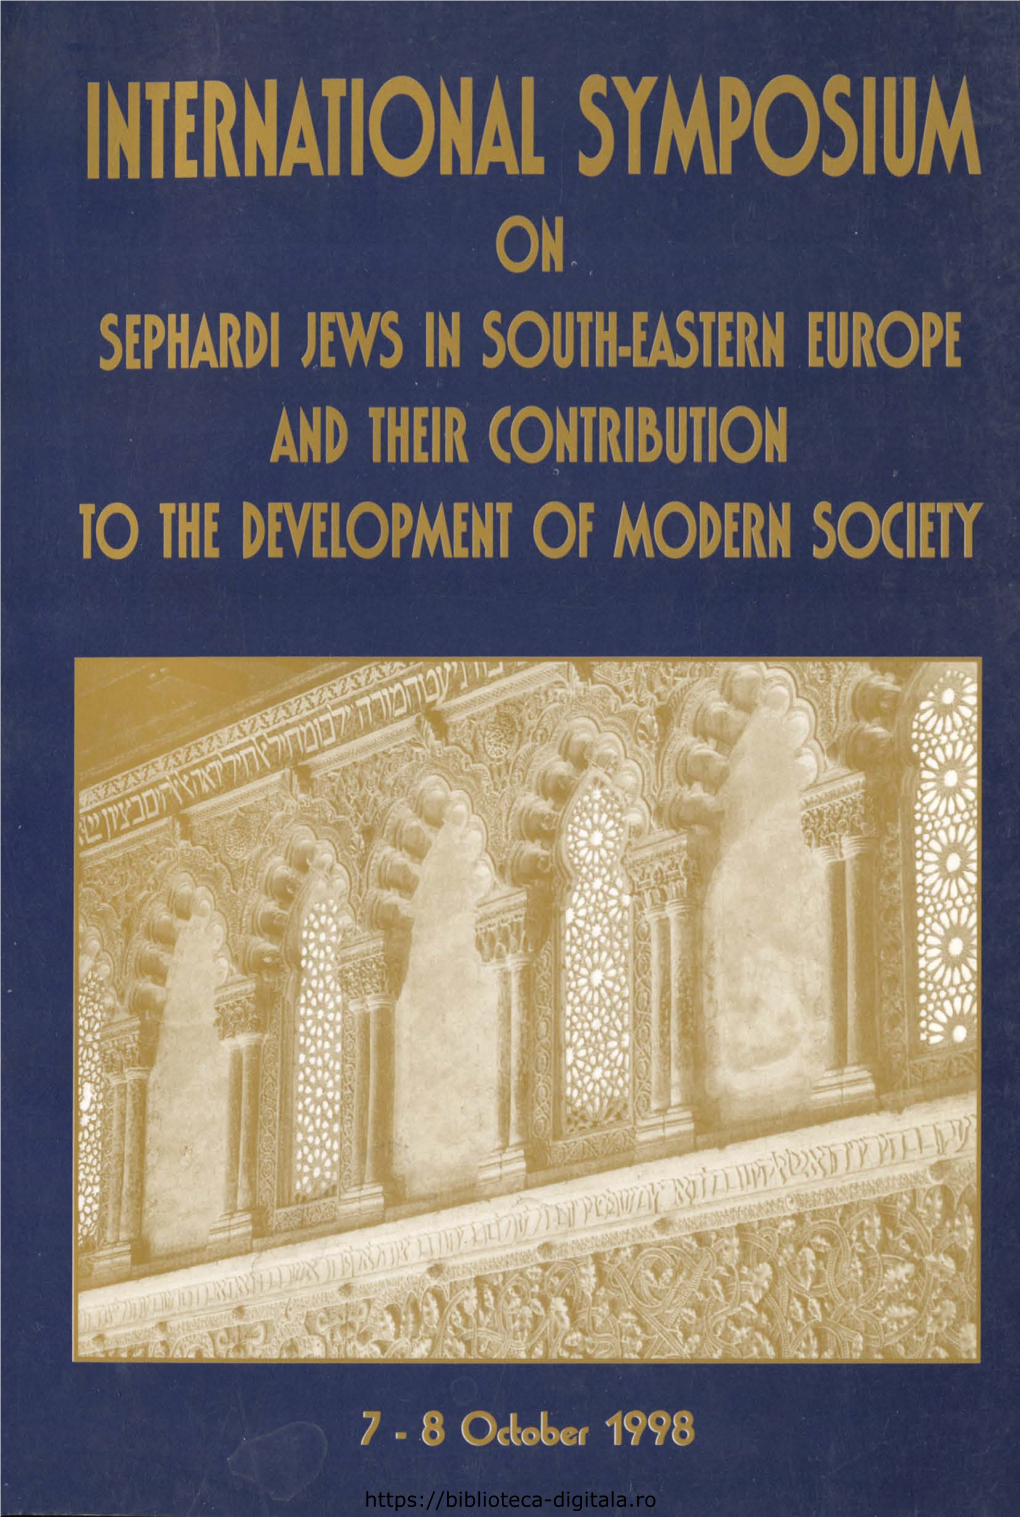 International Symposium on Sephardi Jews in South·Eastern Europe Ano Their Contribution to the Development of the Modern Society